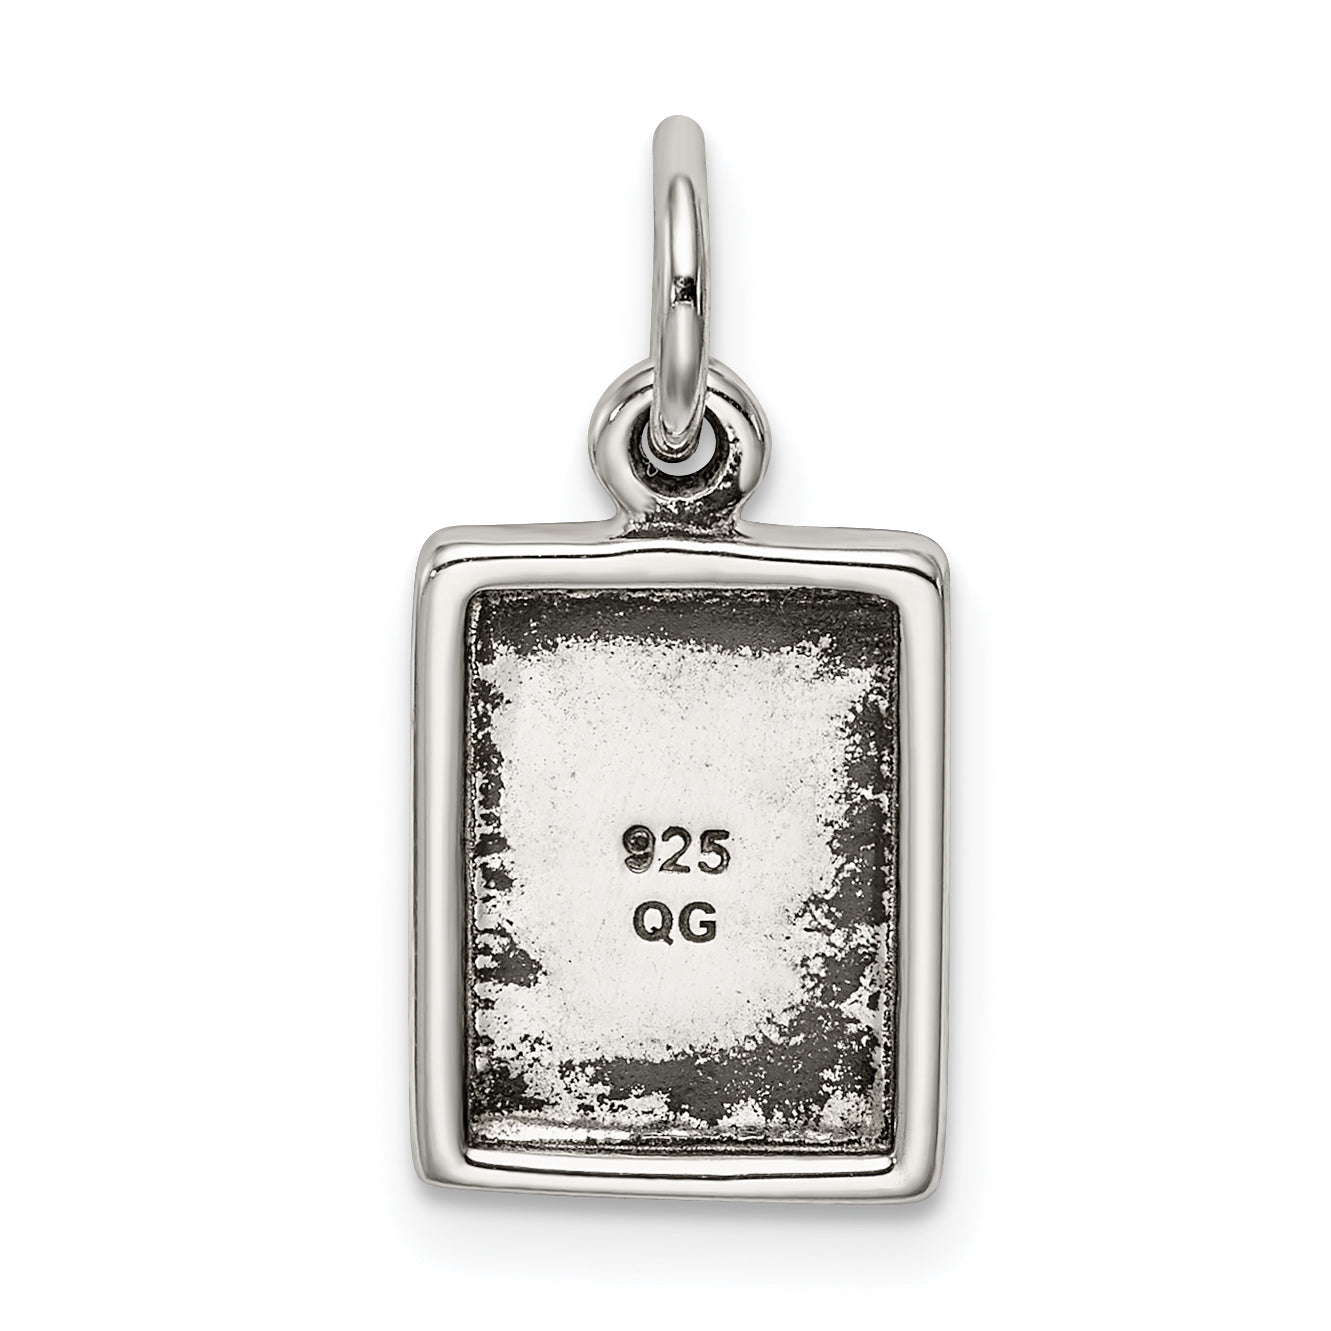 Sterling Silver Antiqued Holy Bible Charm